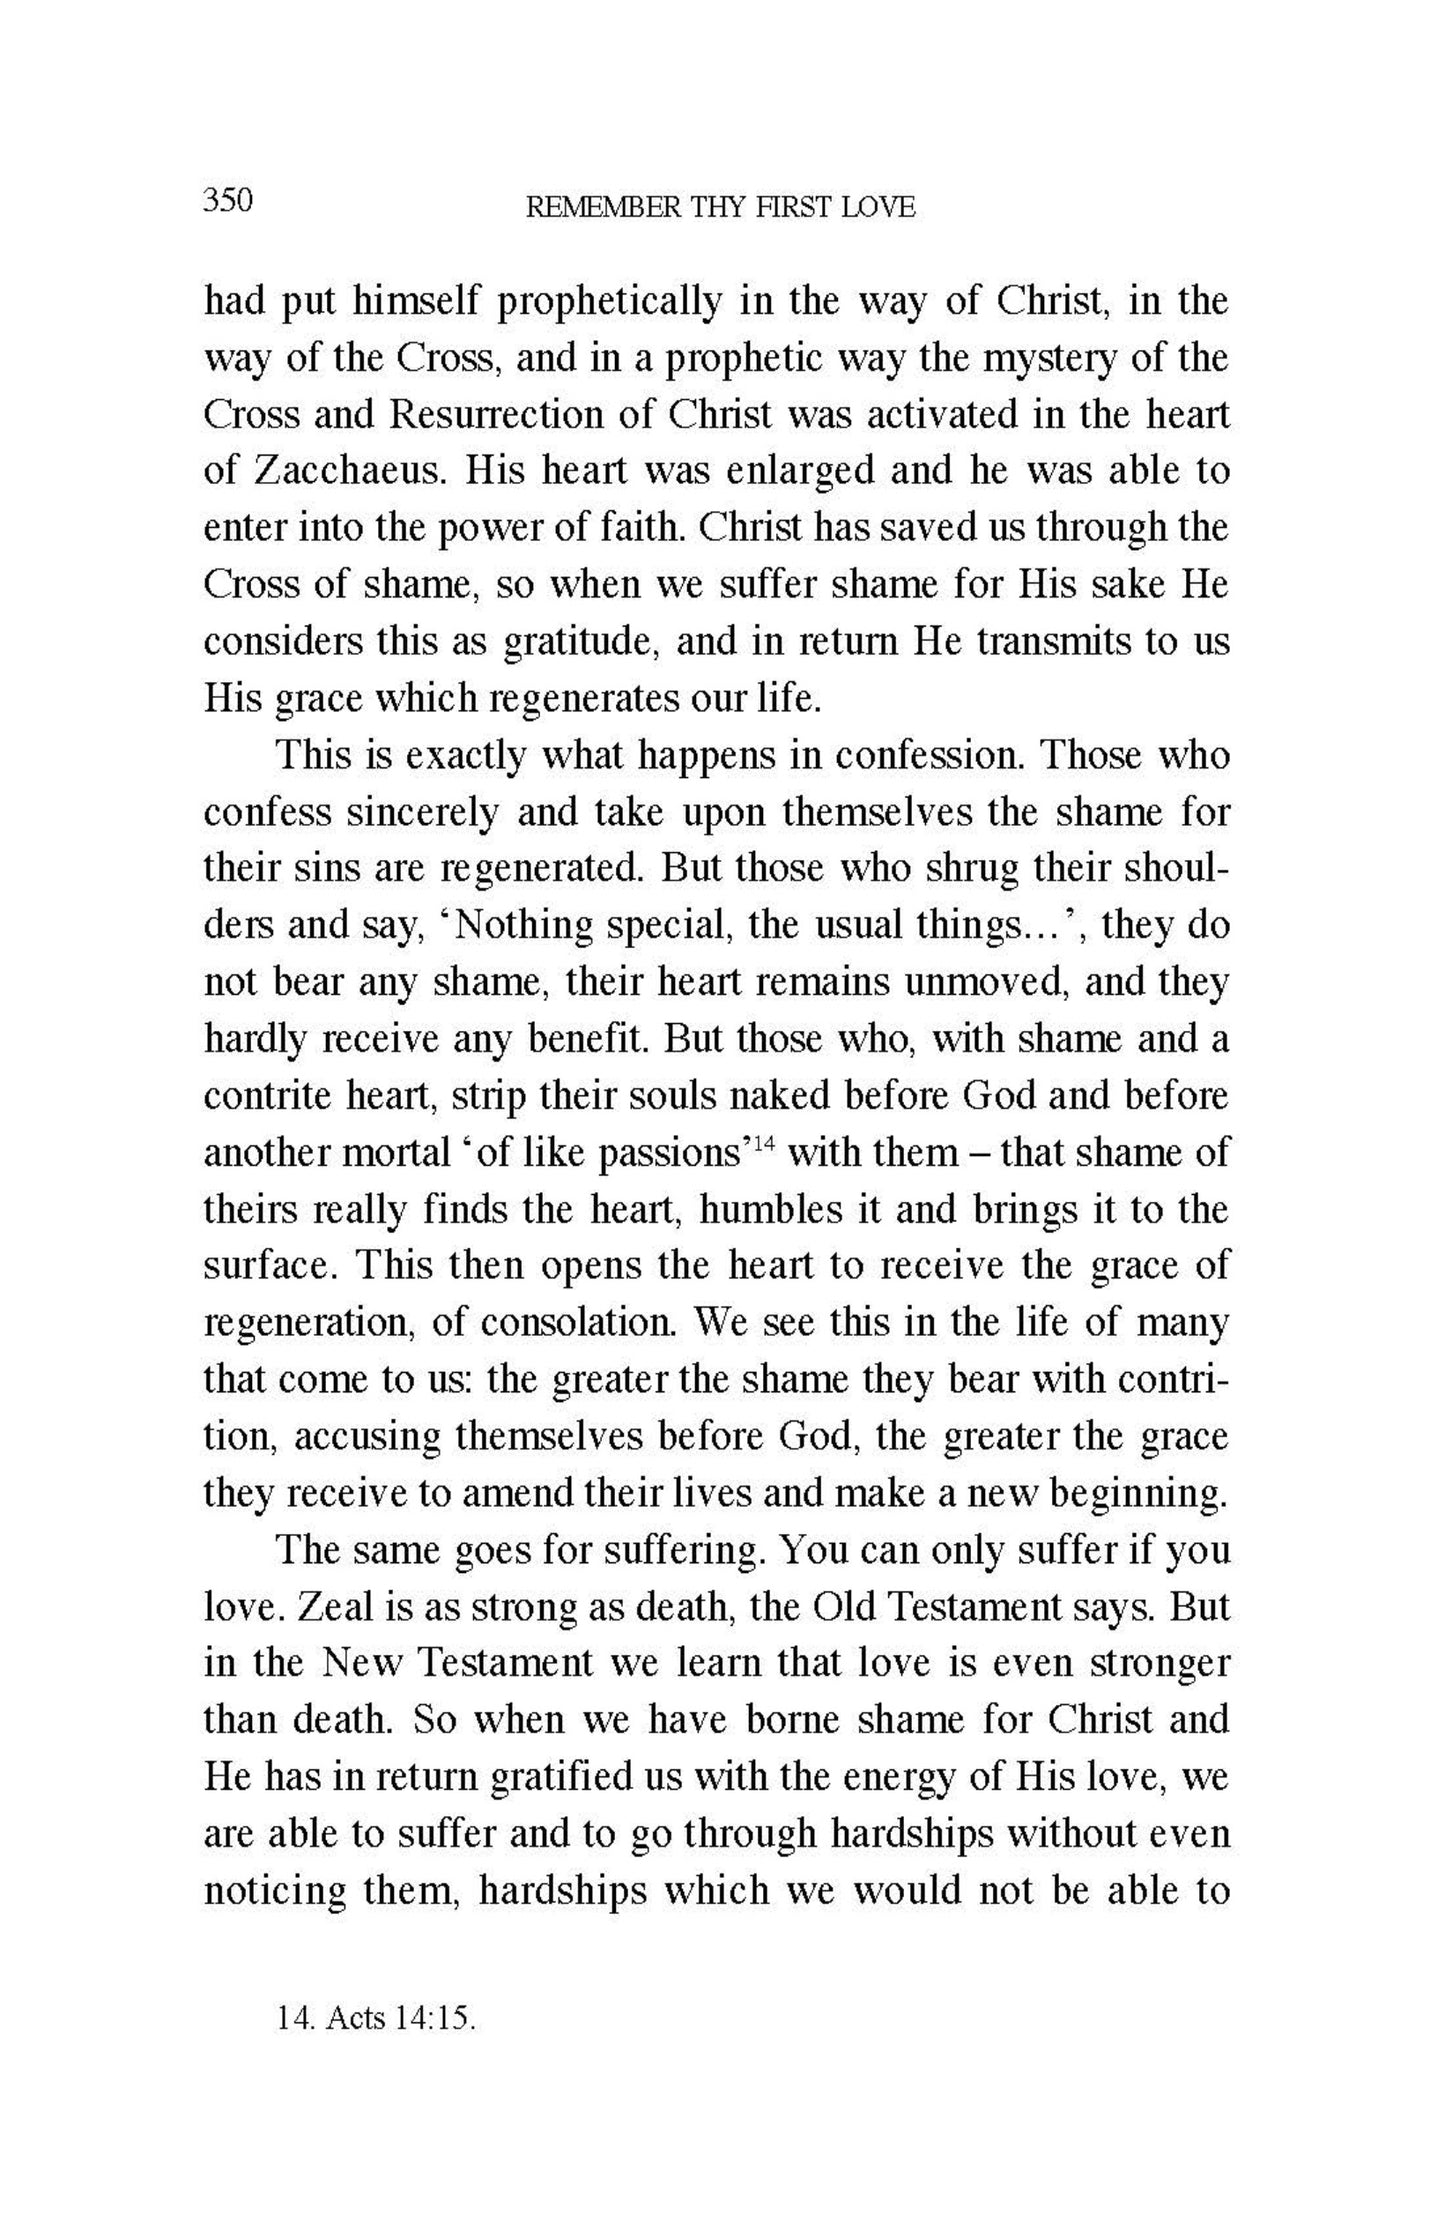 Remember Thy First Love, by Archimandrite Zacharias